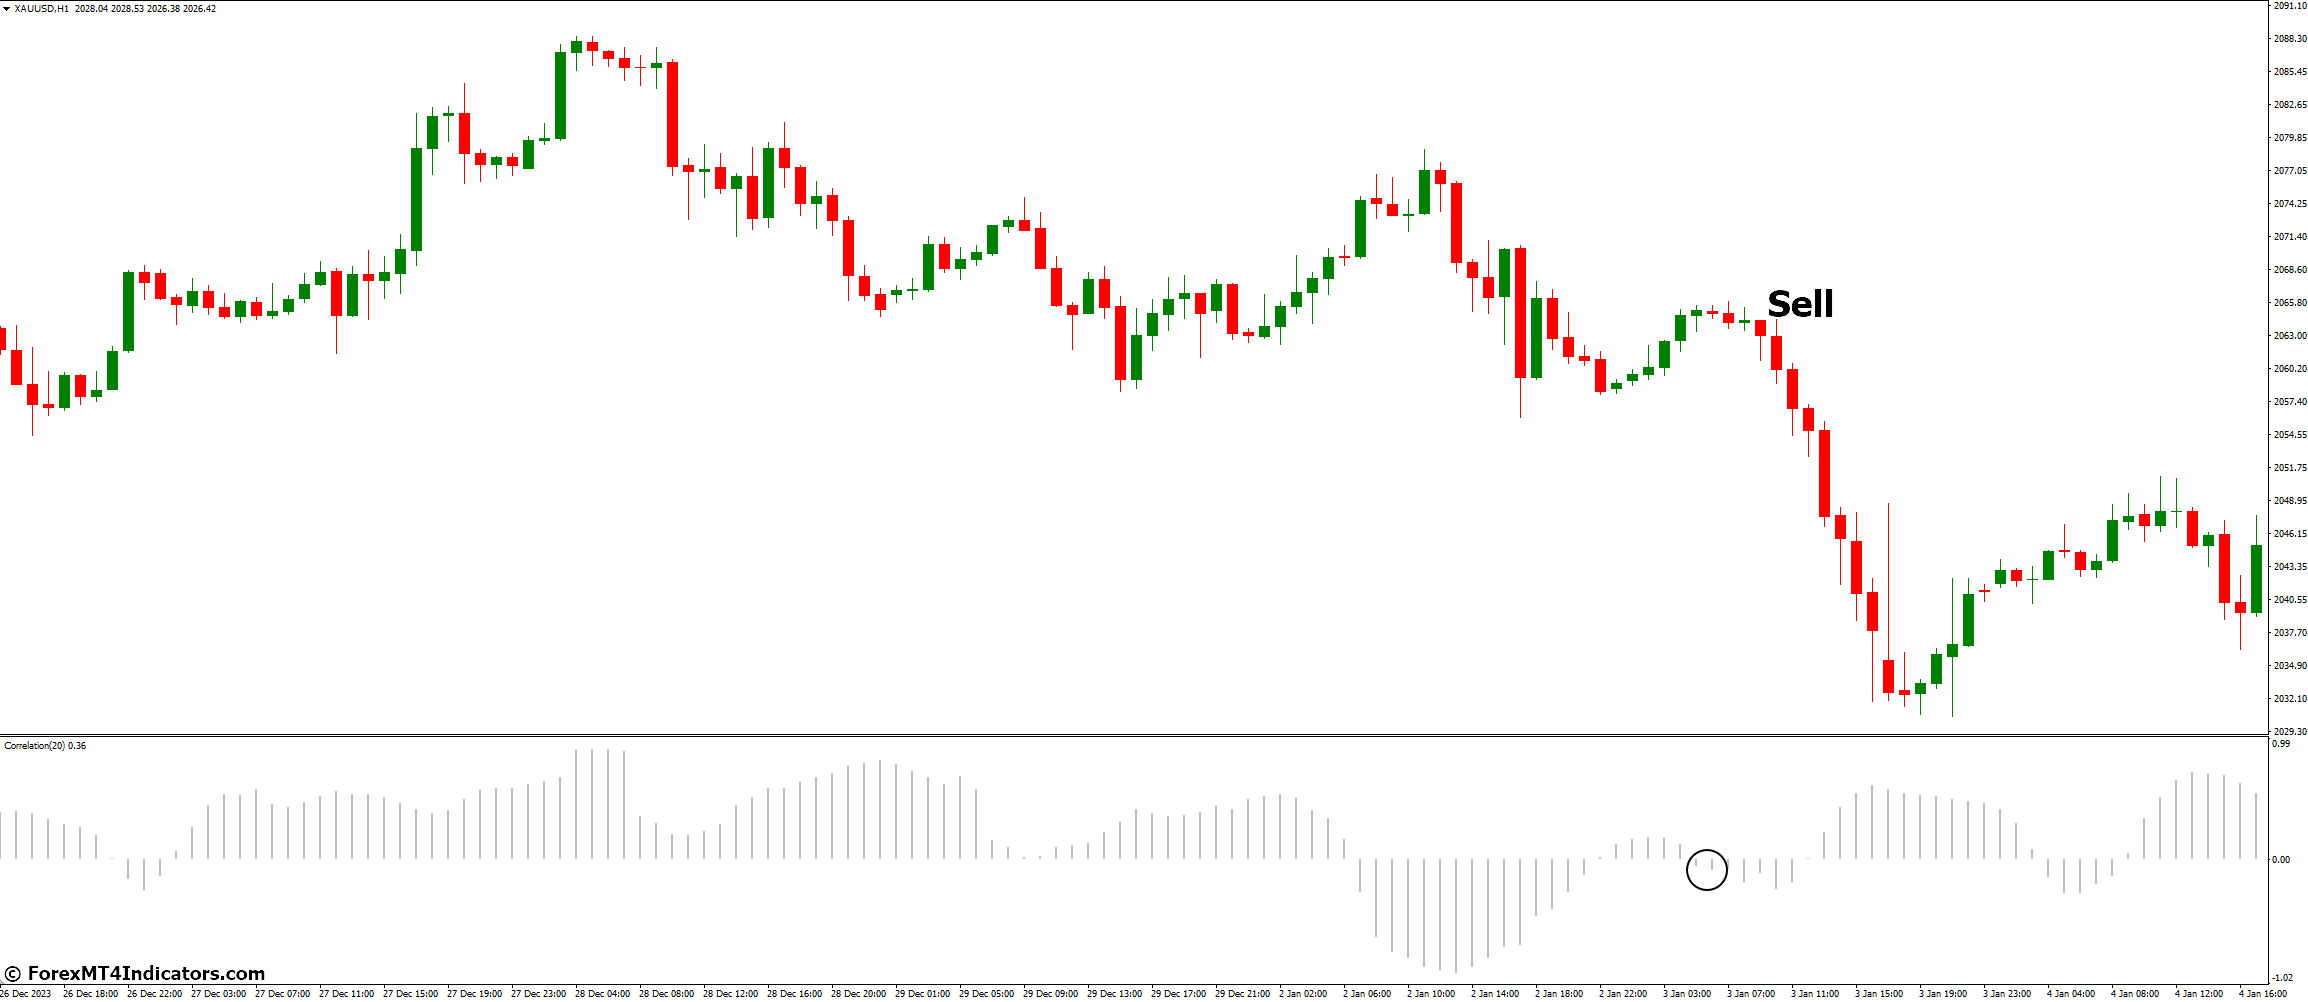 How to Trade with Correlation Indicator - Sell Entry